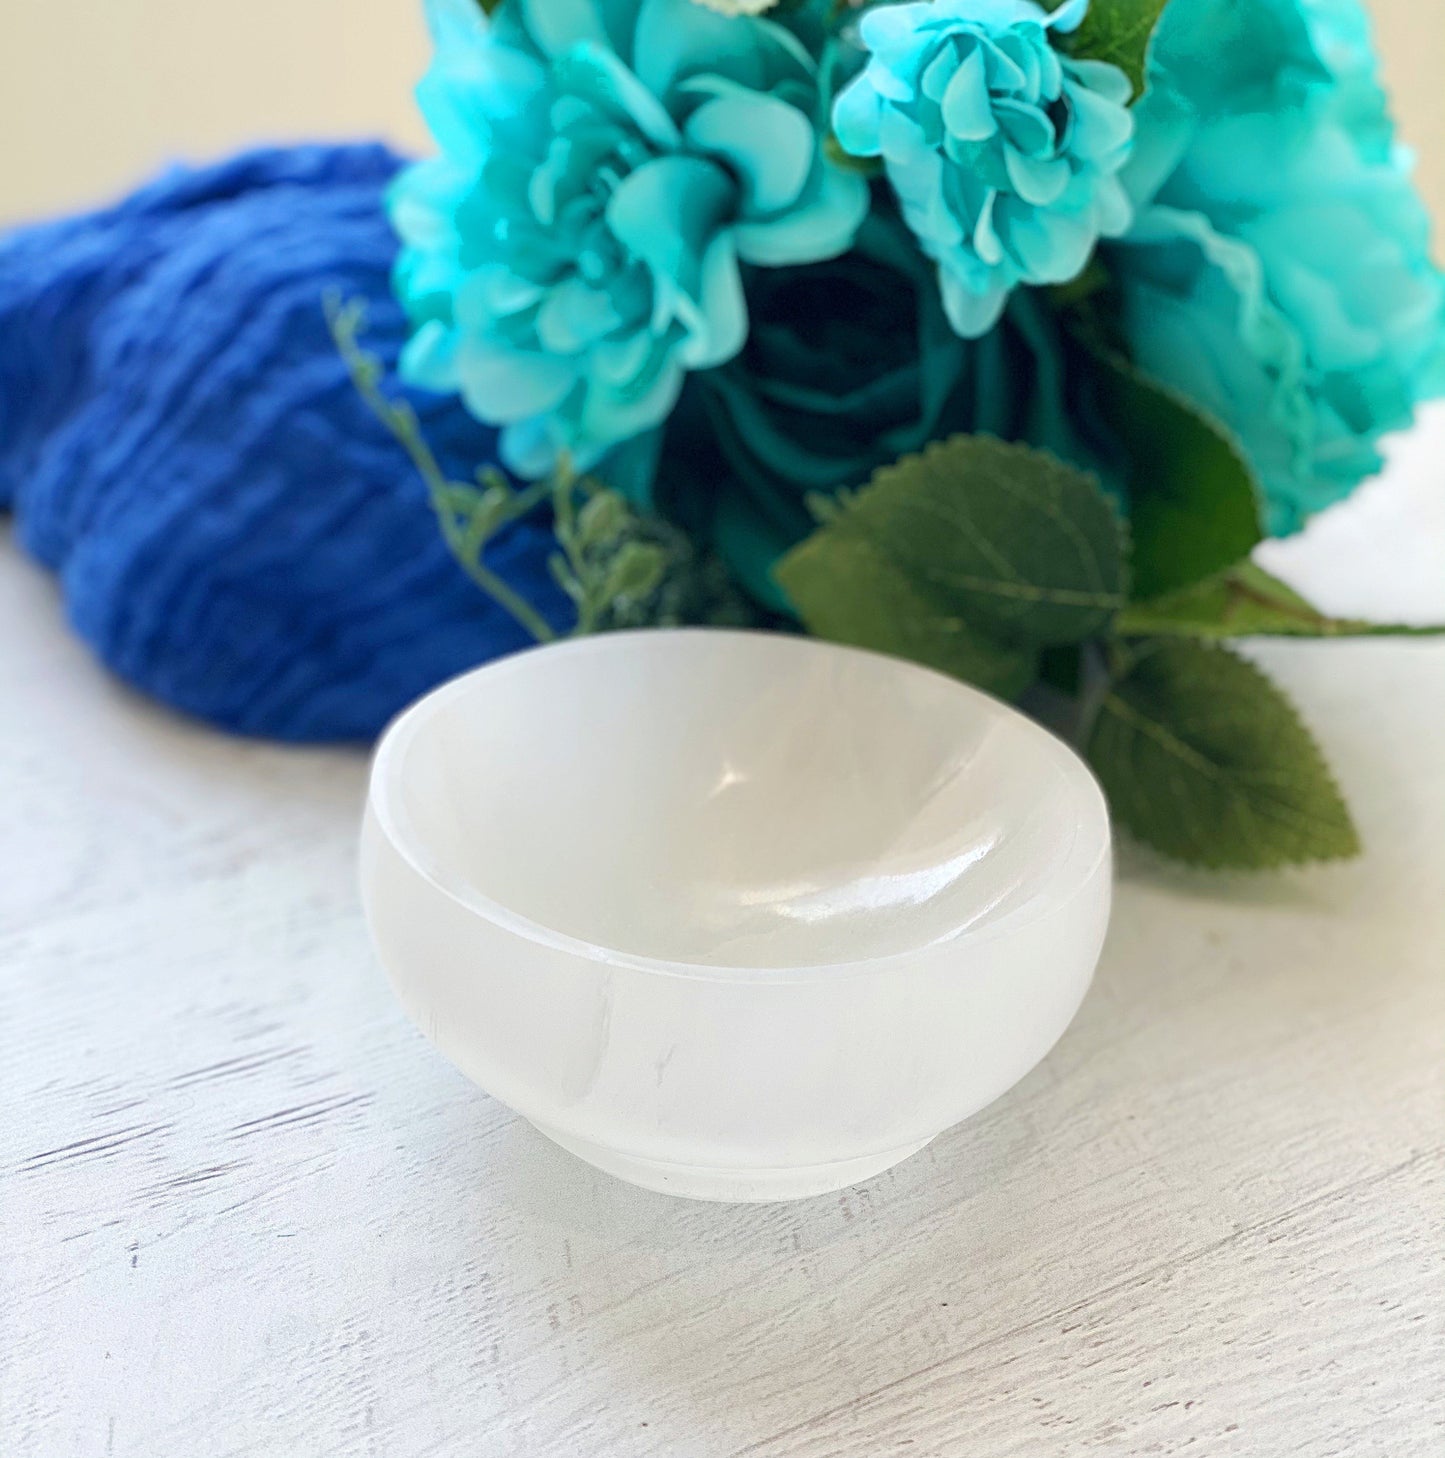 Large Selenite Charging Bowl with Stand